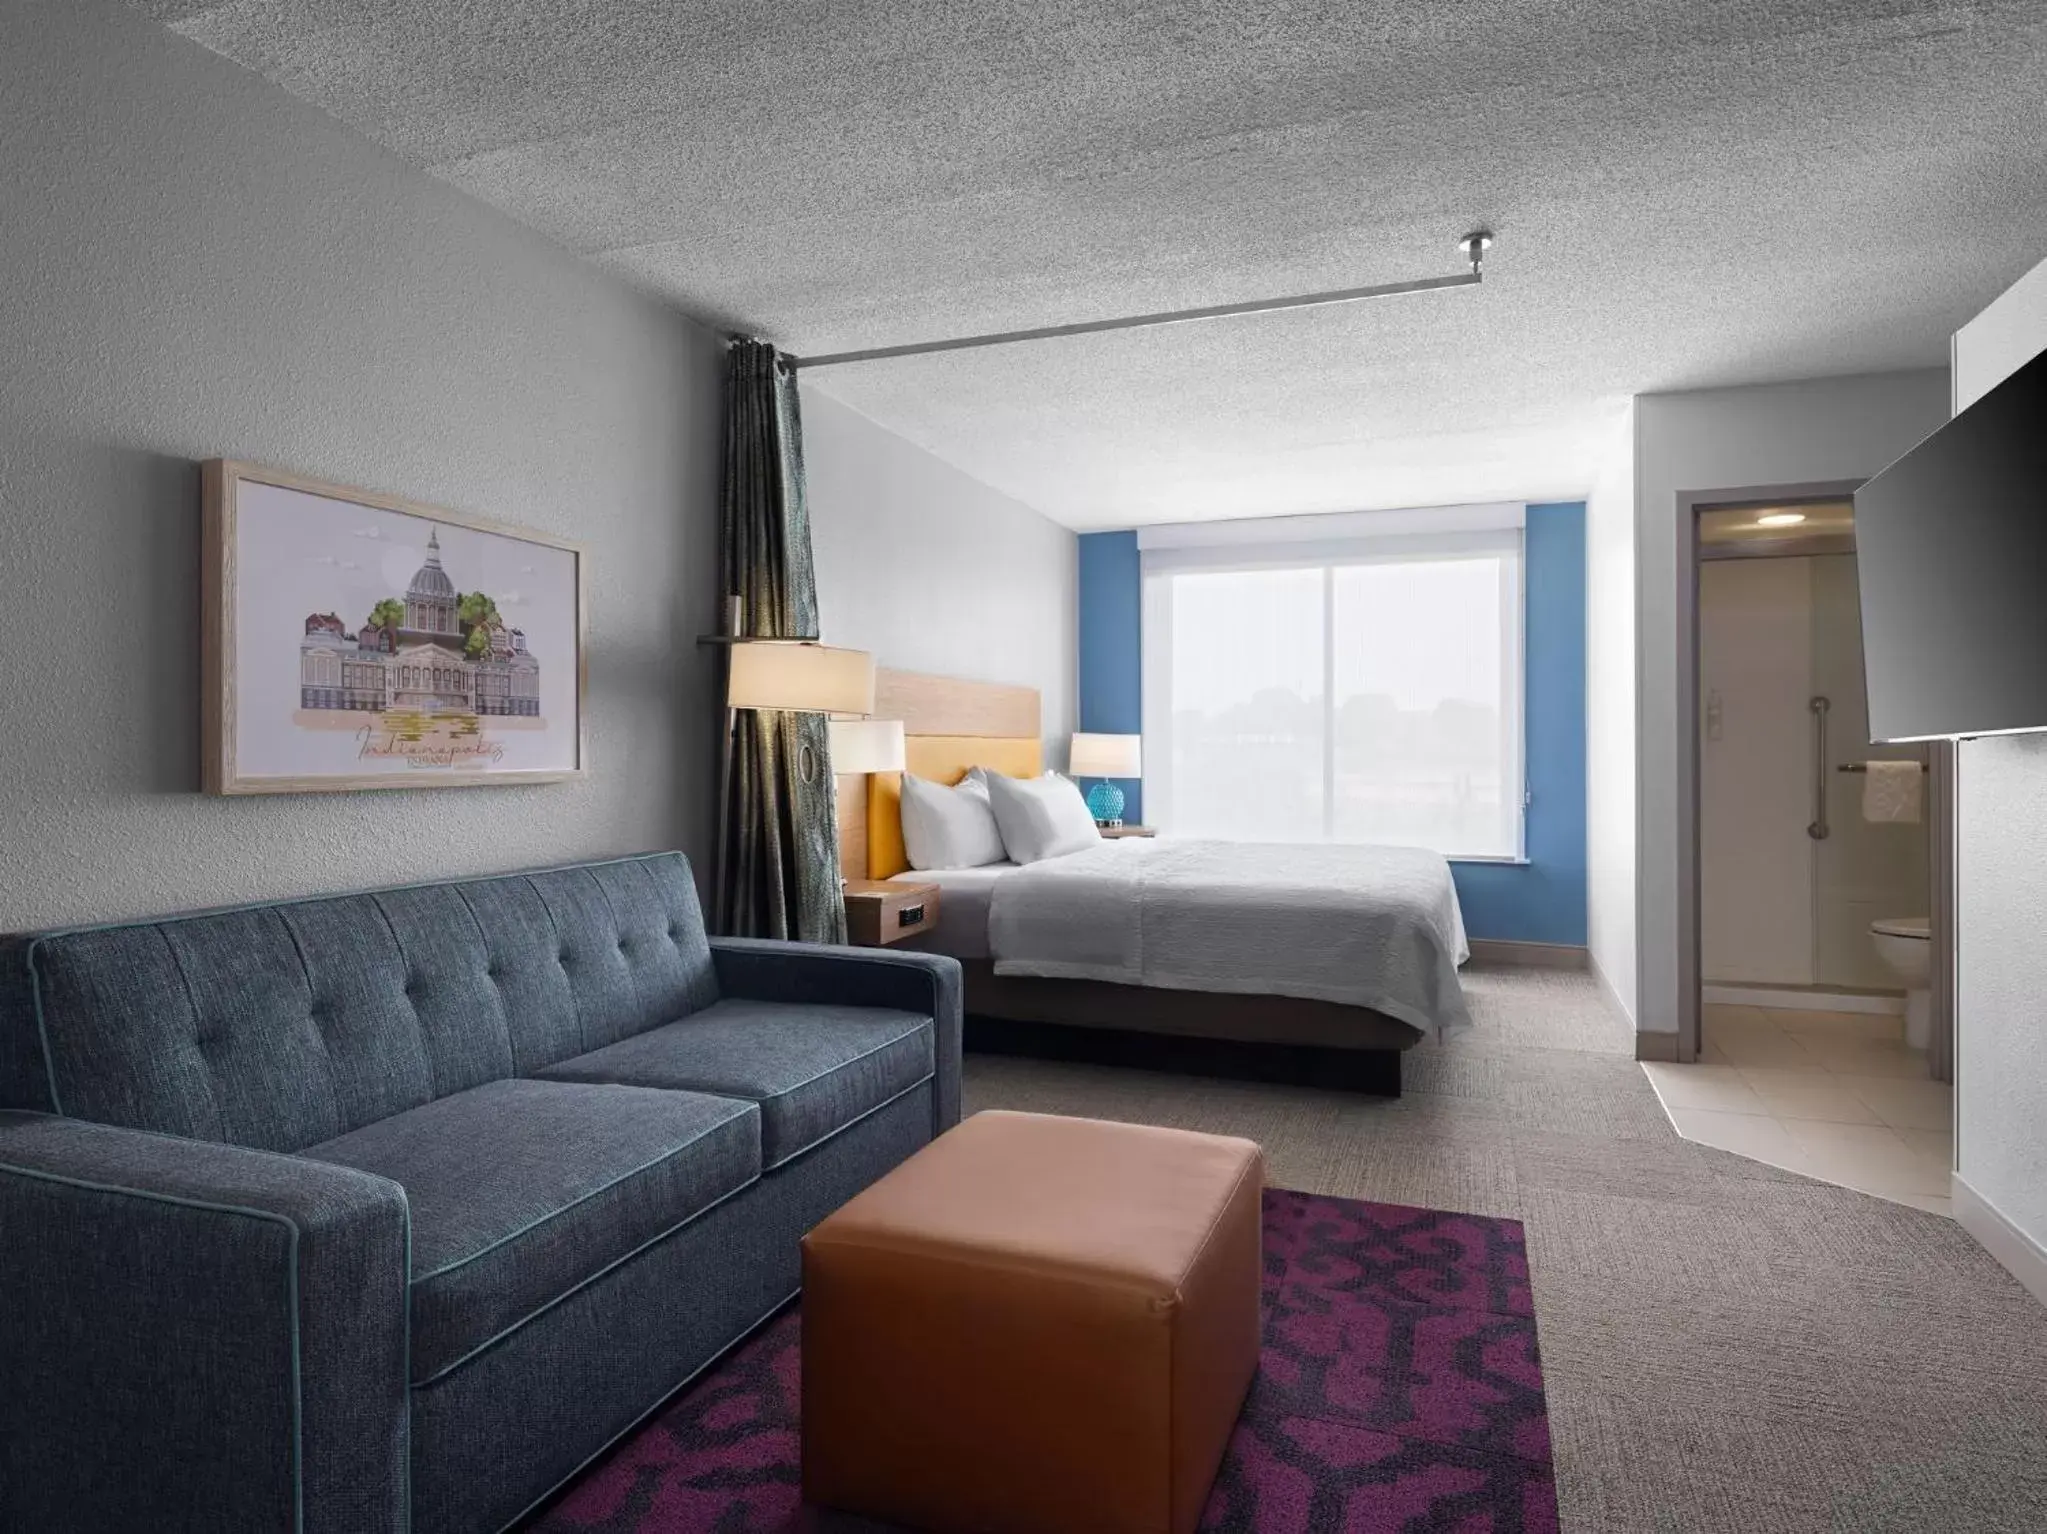 Home2 Suites by Hilton Indianapolis - Keystone Crossing